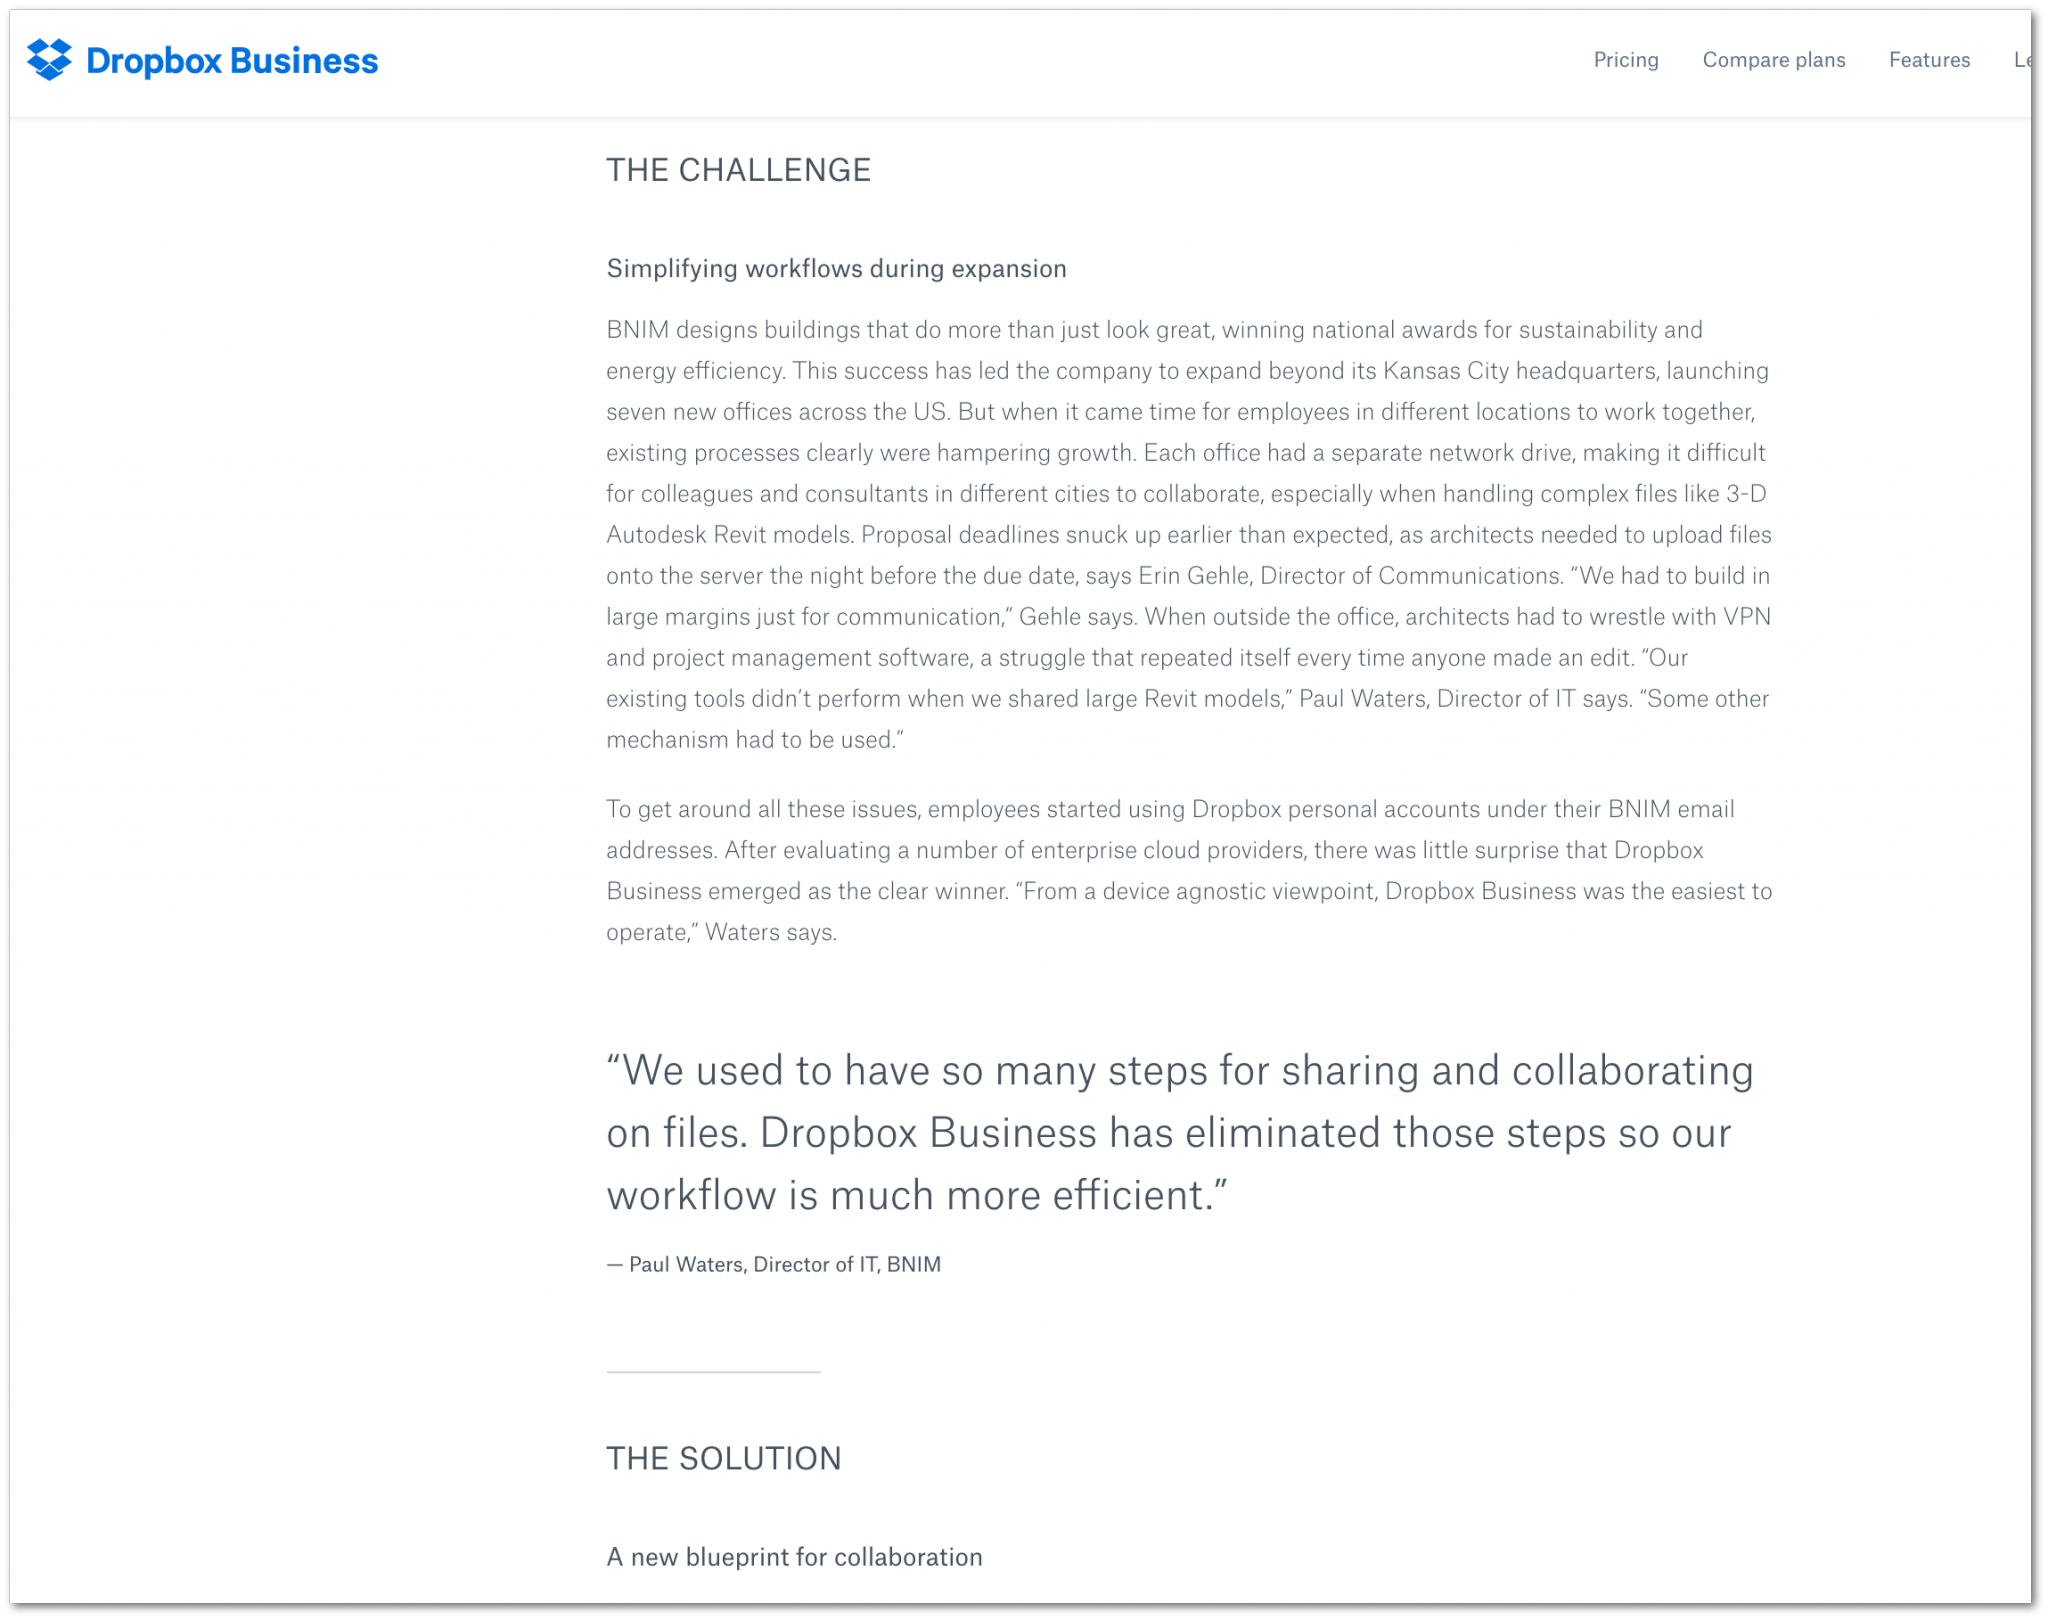 Example of a Dropbox case study that focusses on the experiences of the customer company. Customer quotes accompany a description of the project’s challenge, solution and results.